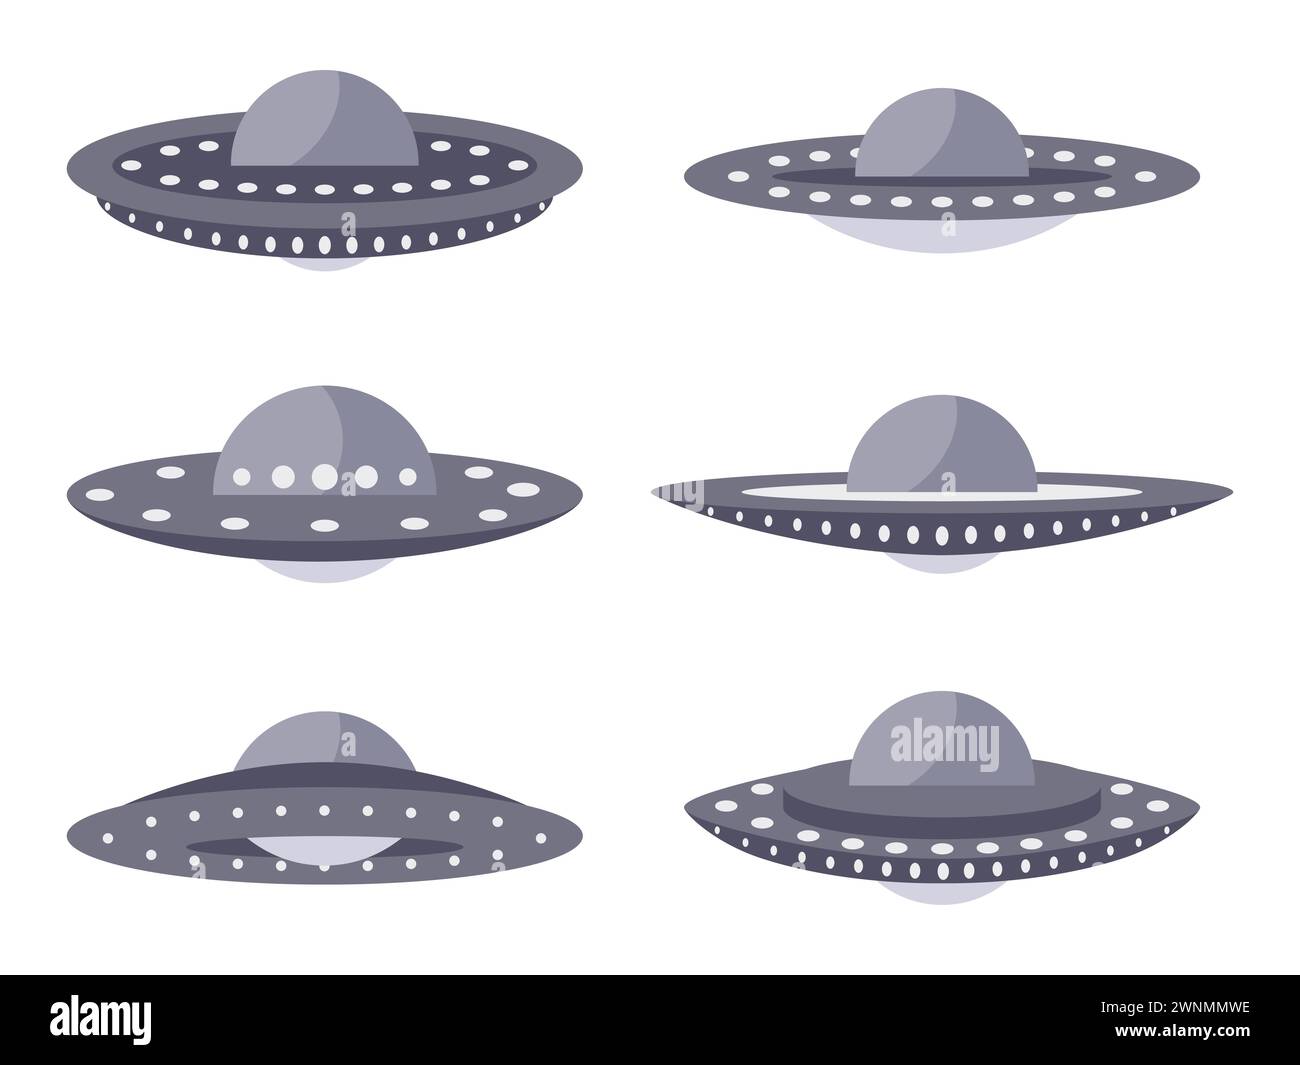 Ufo icon set isolated on white background. Collection of alien spaceships, space flying saucer. Alien spacecrafts. Icon design for print, banners and Stock Vector